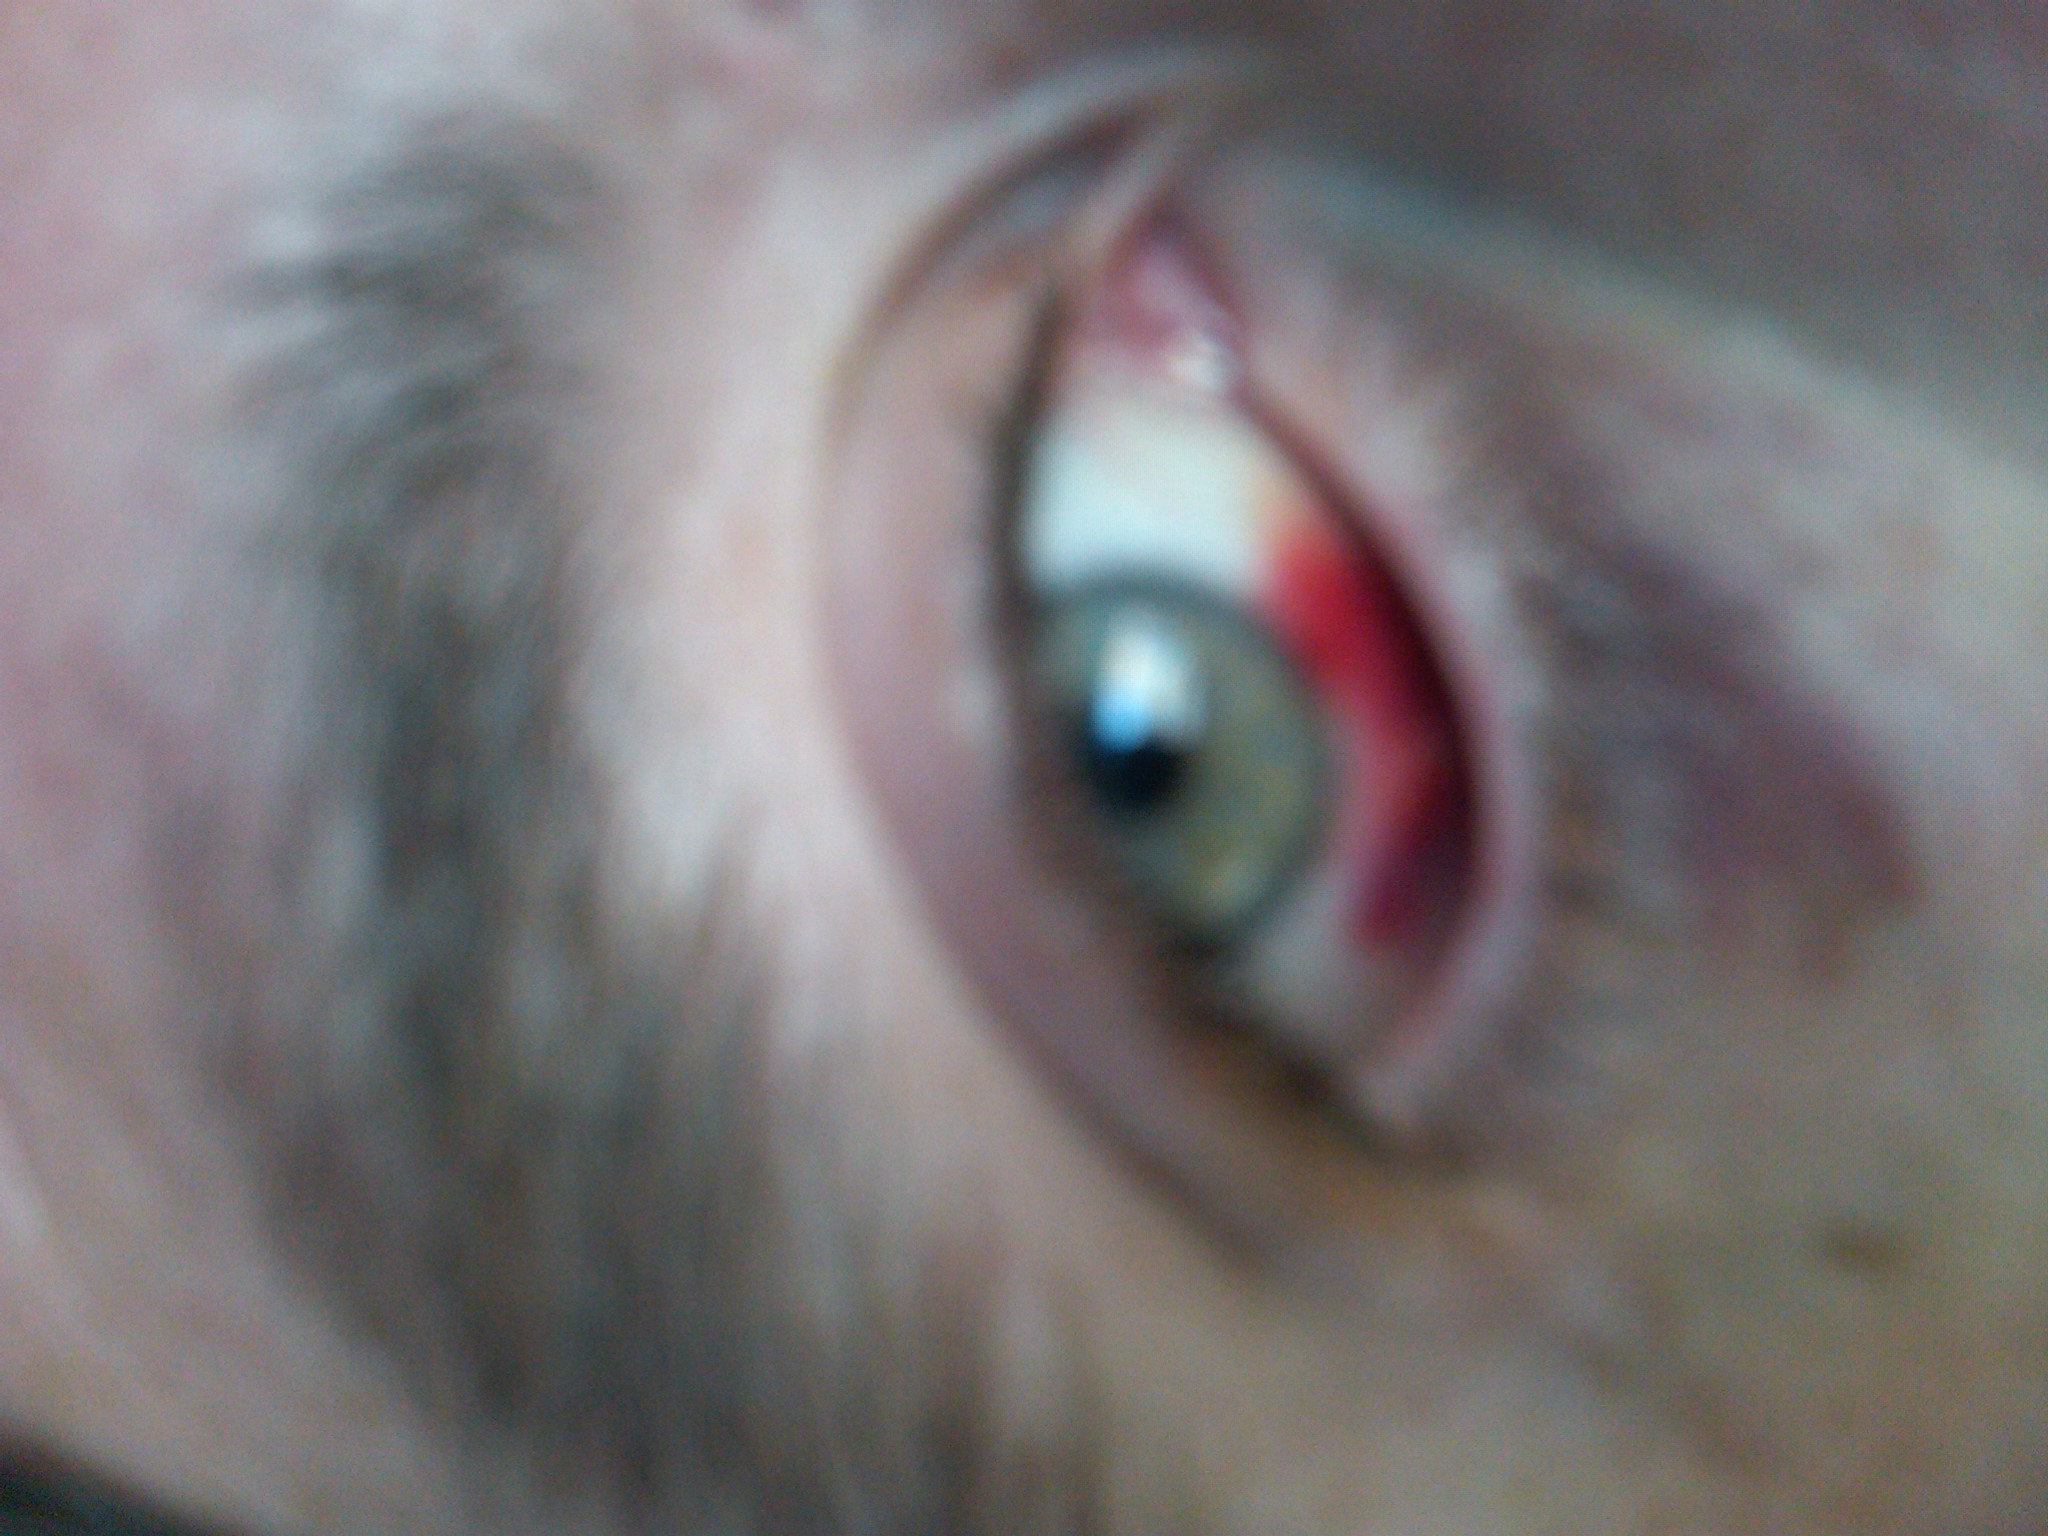 Passed out with a needle beside me on the bed  fell on it. Right in the eyeball. 